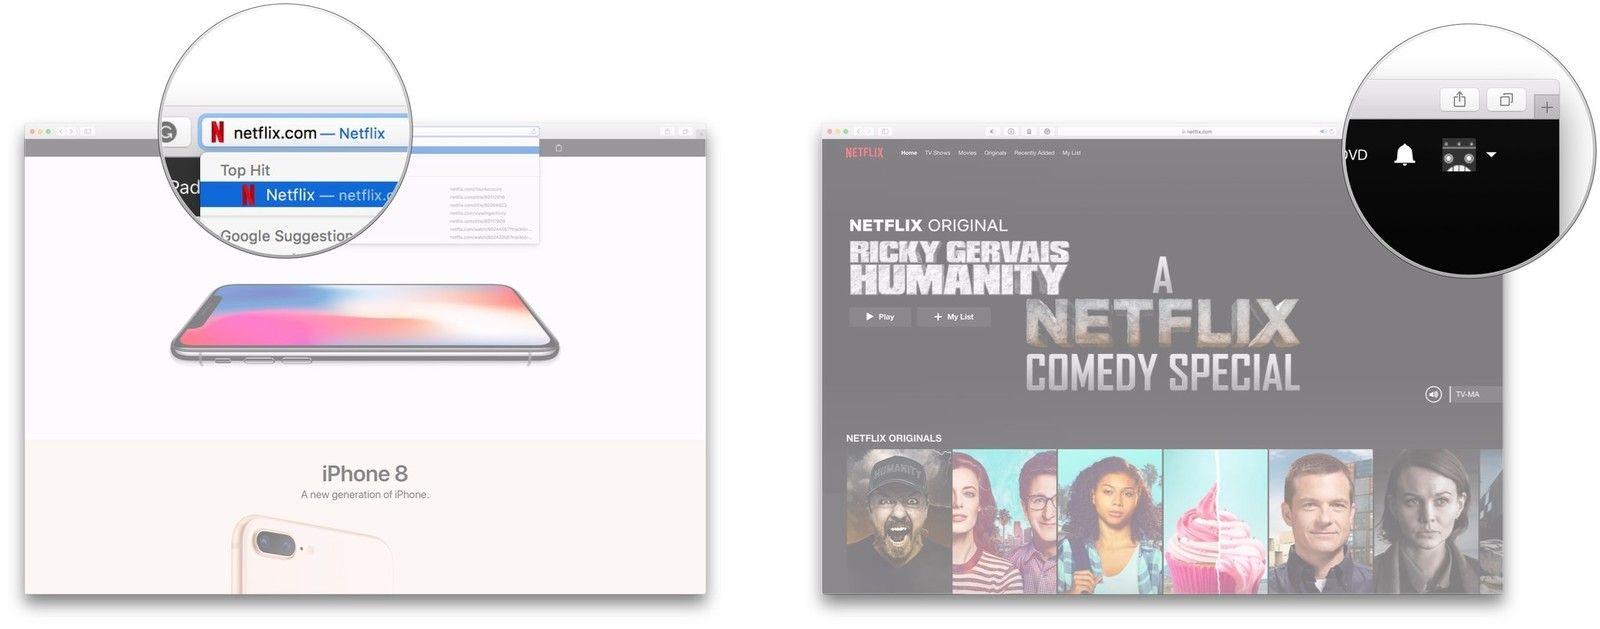 Netflix Clear Logo - How to clear your viewing history in Netflix